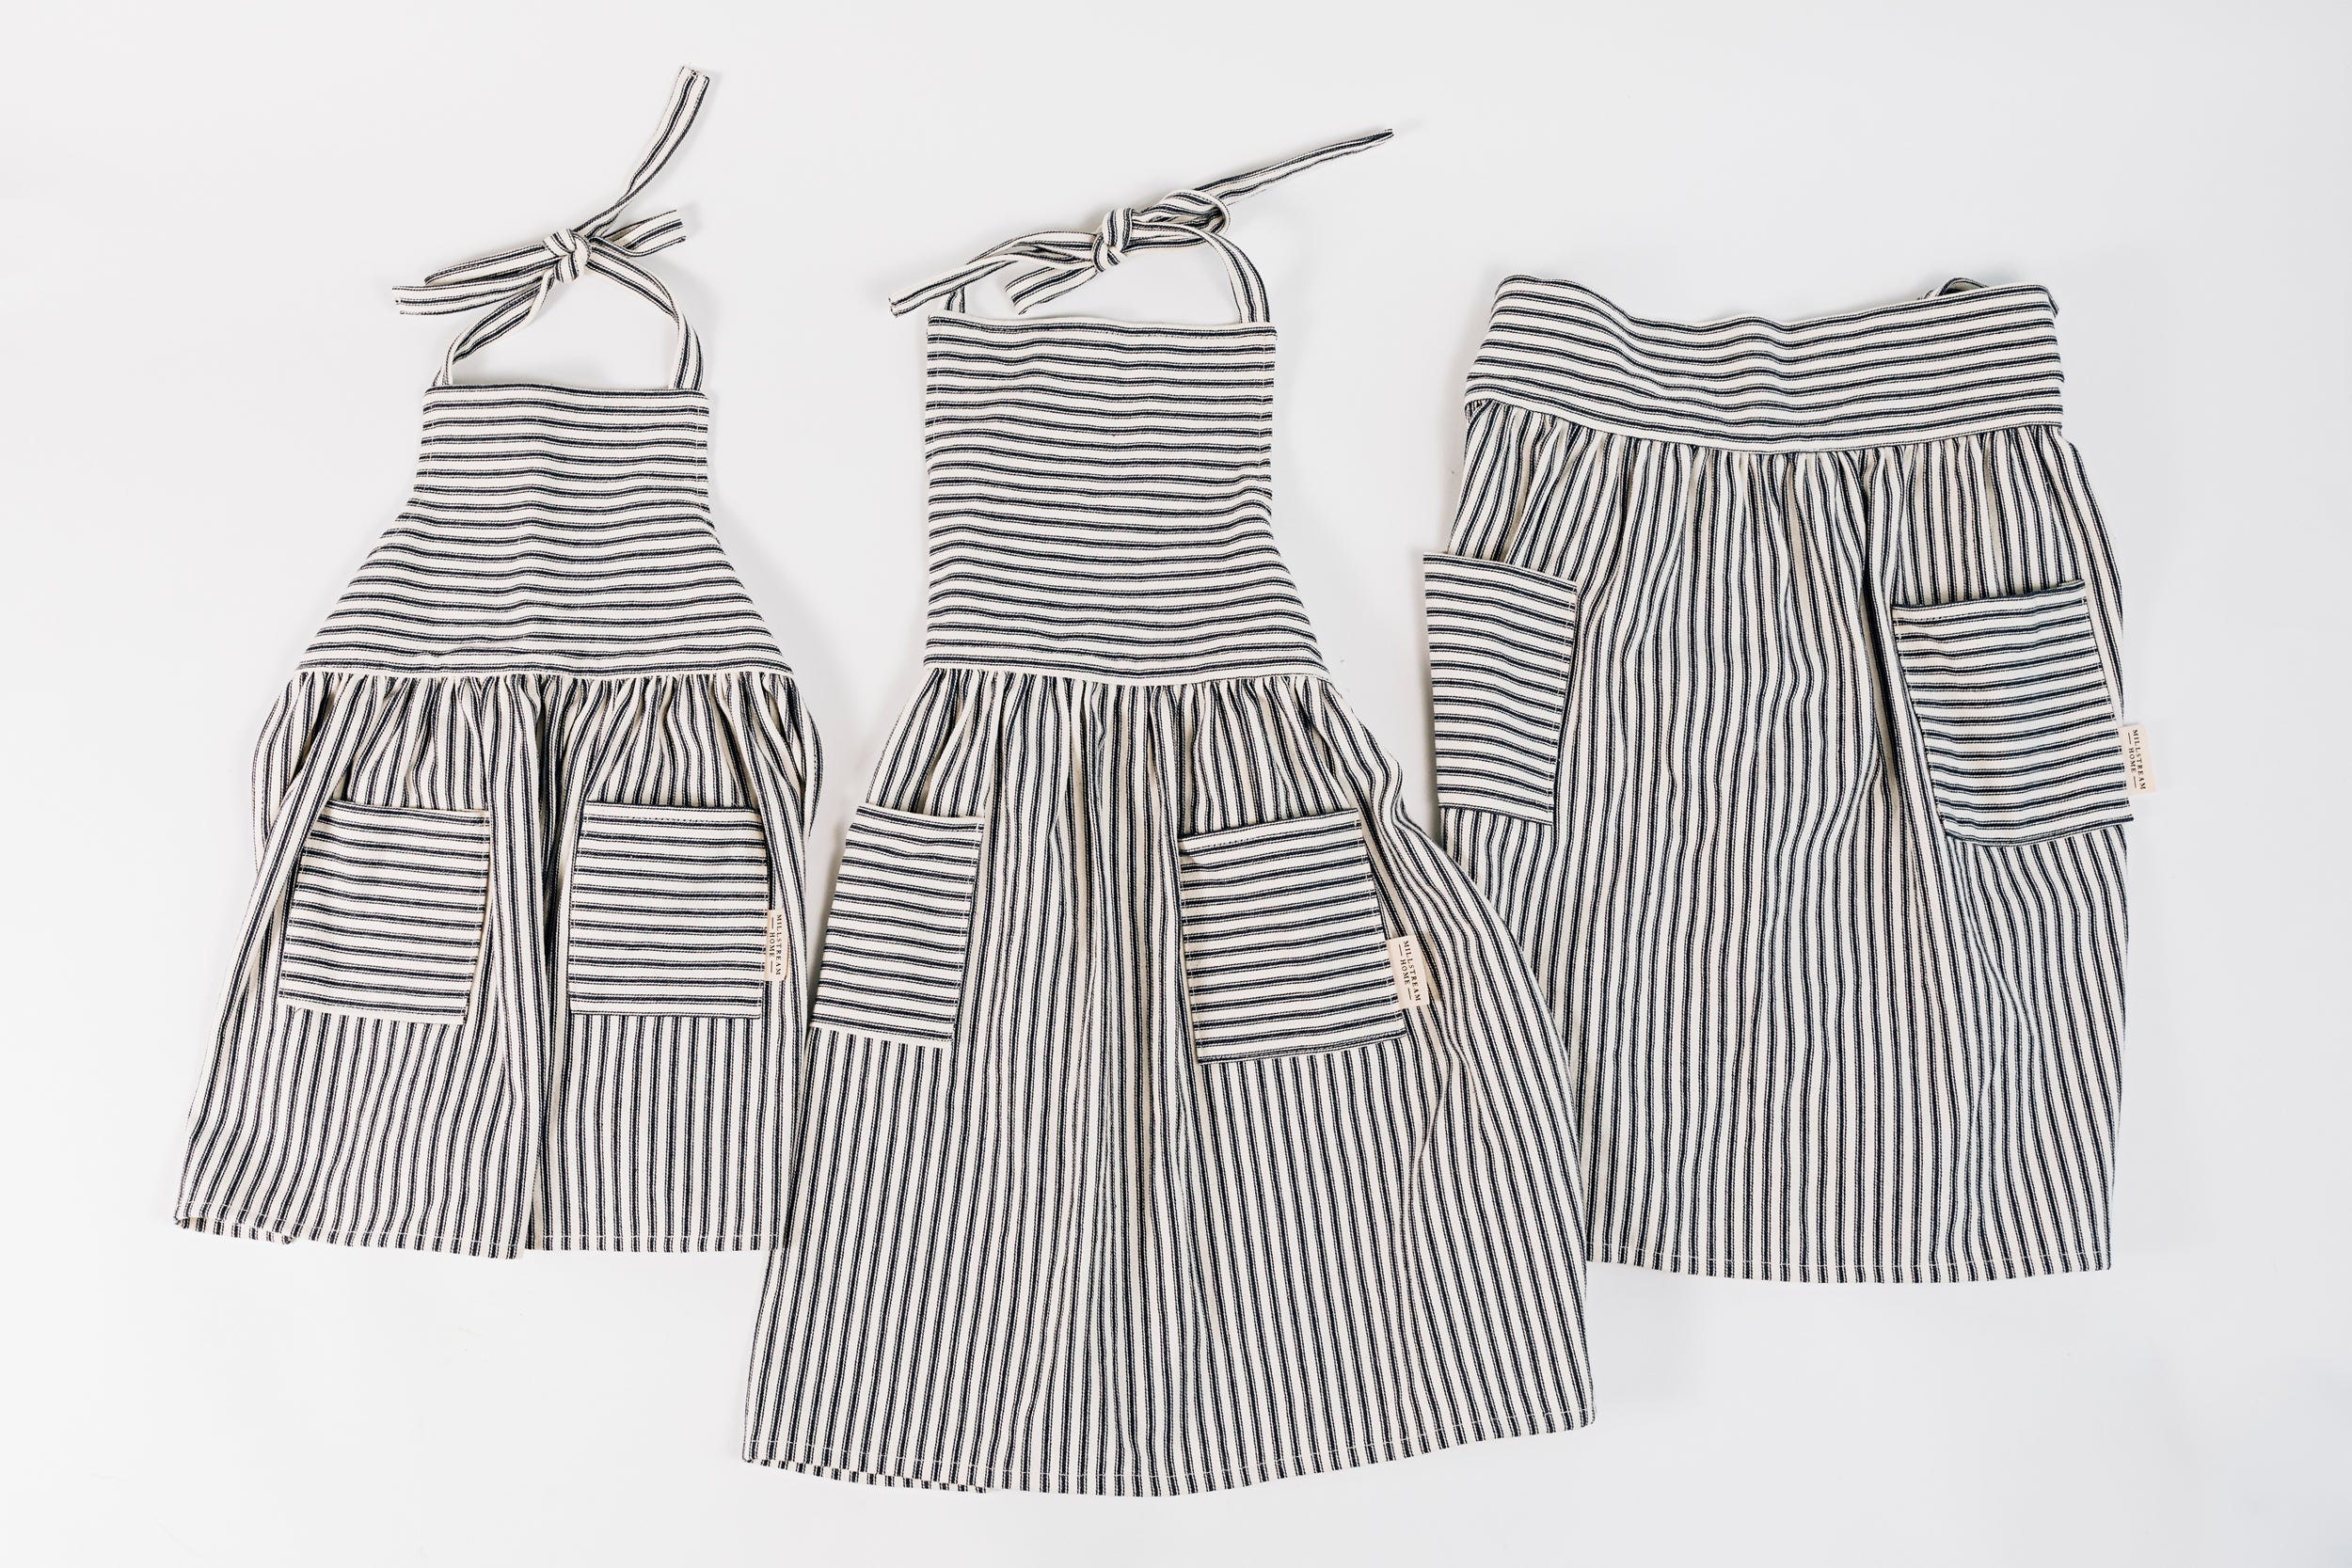 Three Ticking Aprons on a White Background